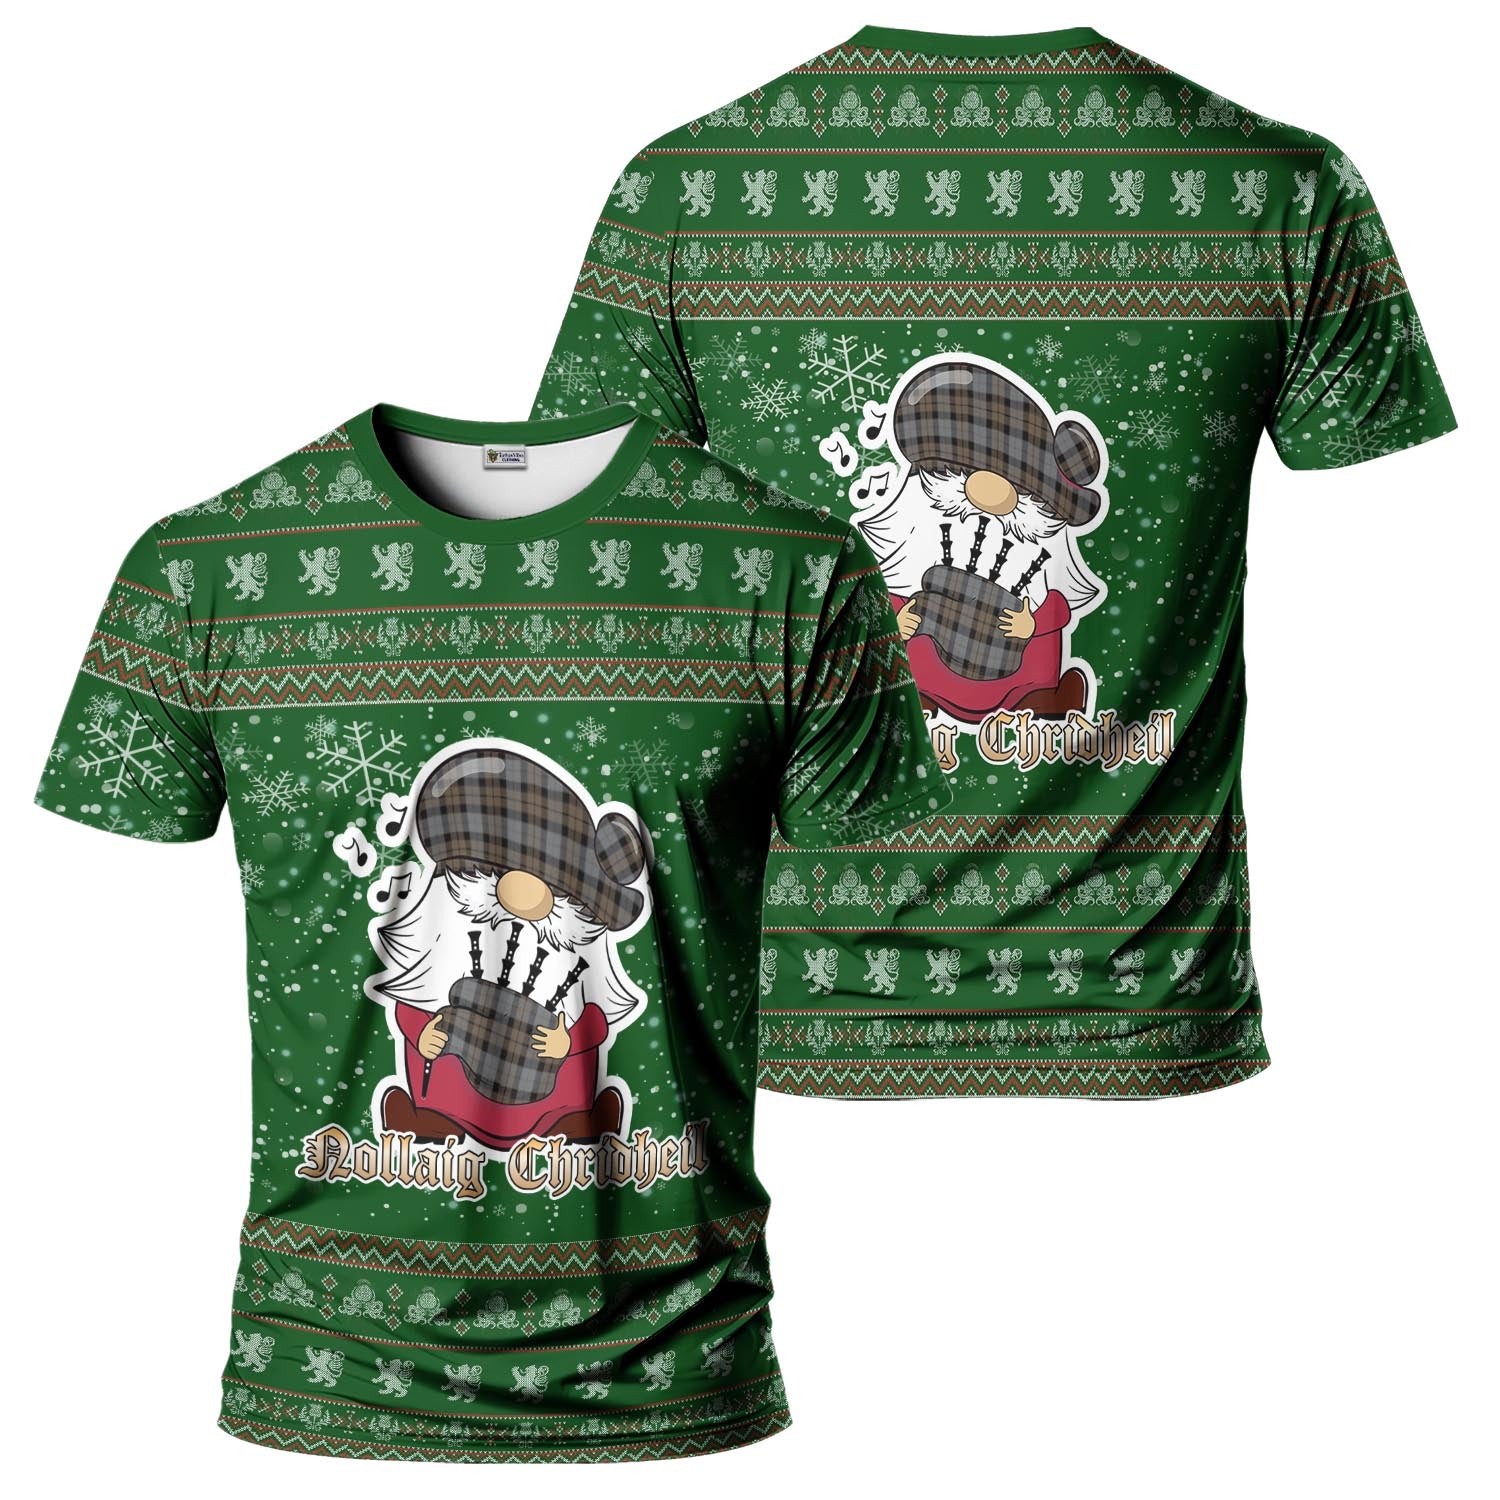 MacKay Weathered Clan Christmas Family T-Shirt with Funny Gnome Playing Bagpipes Men's Shirt Green - Tartanvibesclothing